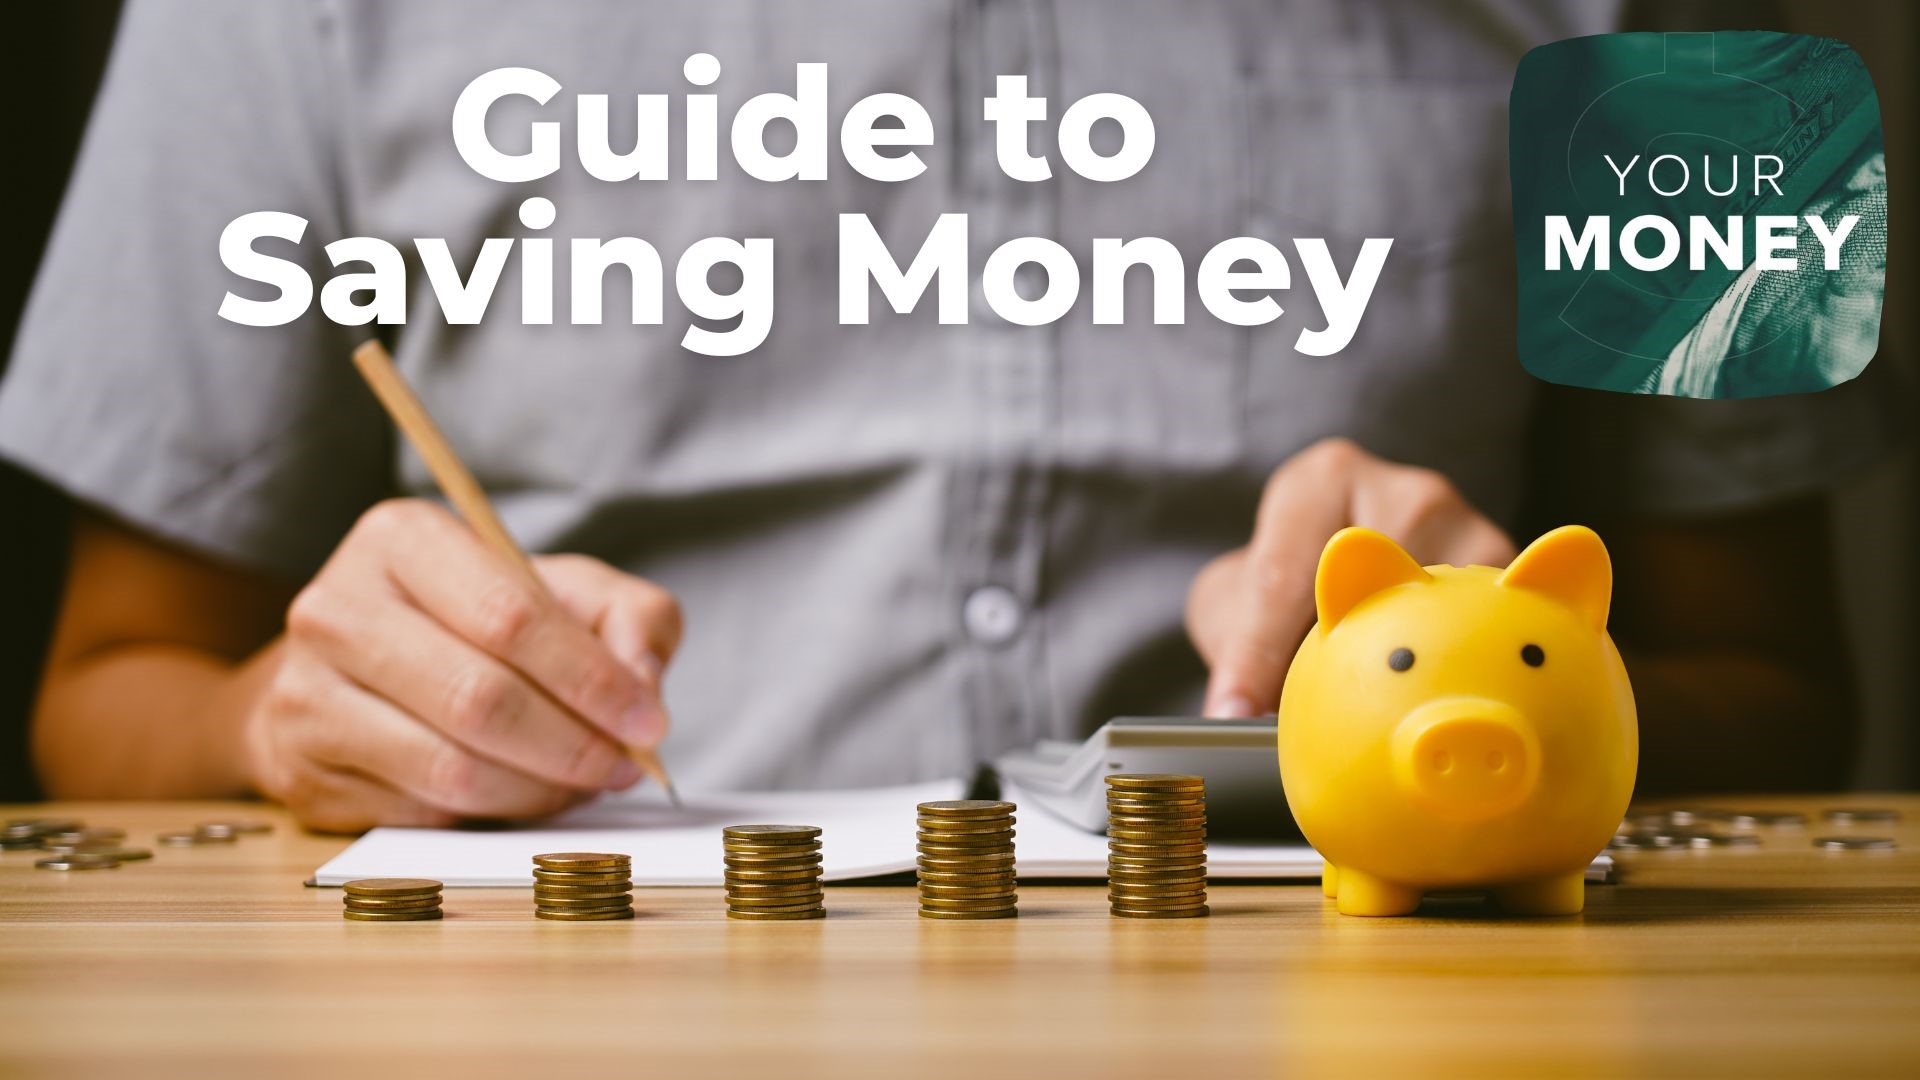 Tips to how you can save money. From explaining high-yield savings accounts to making investments, experts explain how you can take control of your finances.